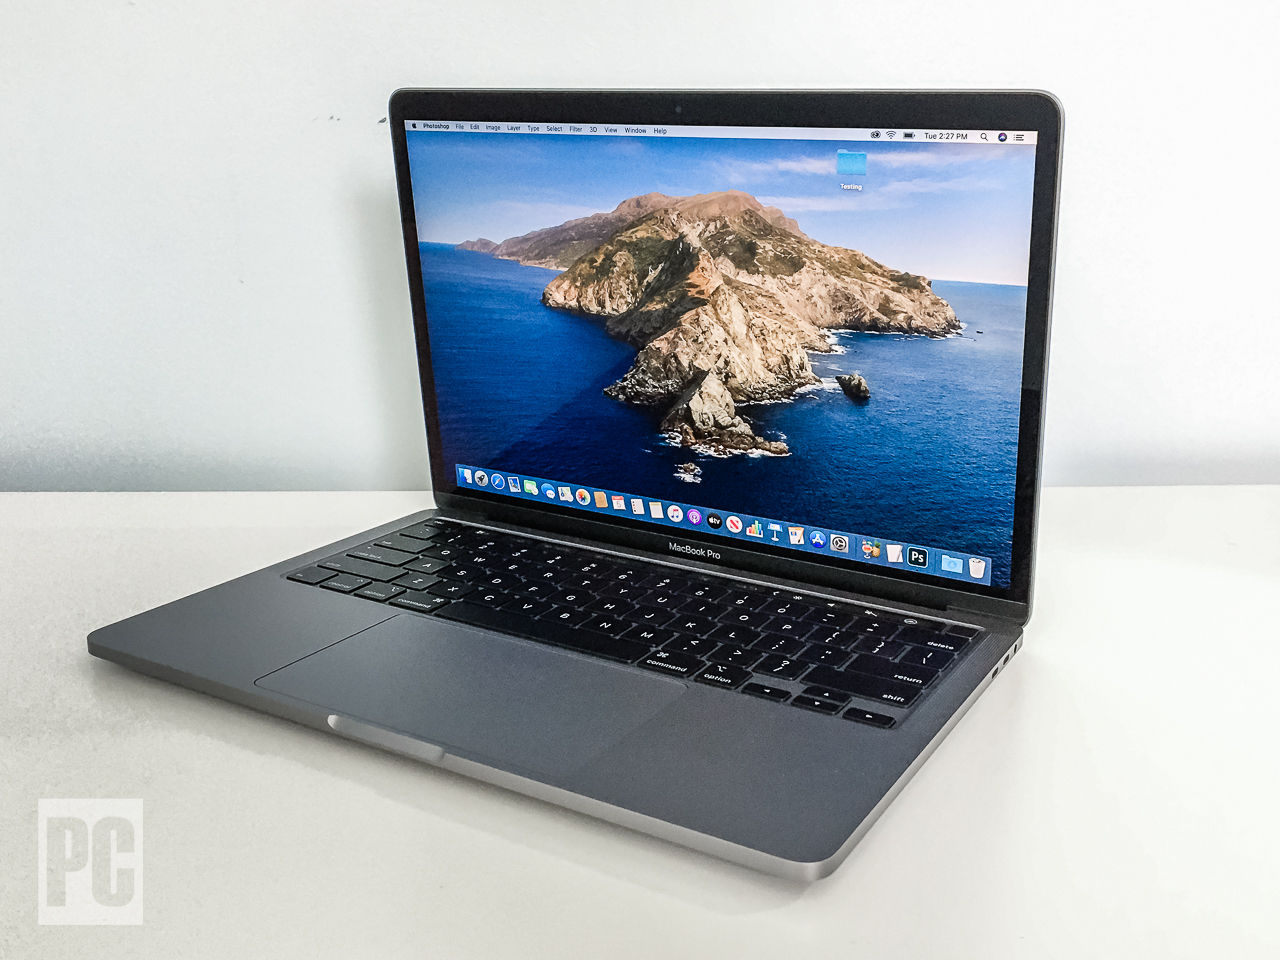 why should i pay so much for a apple mac book vs windows